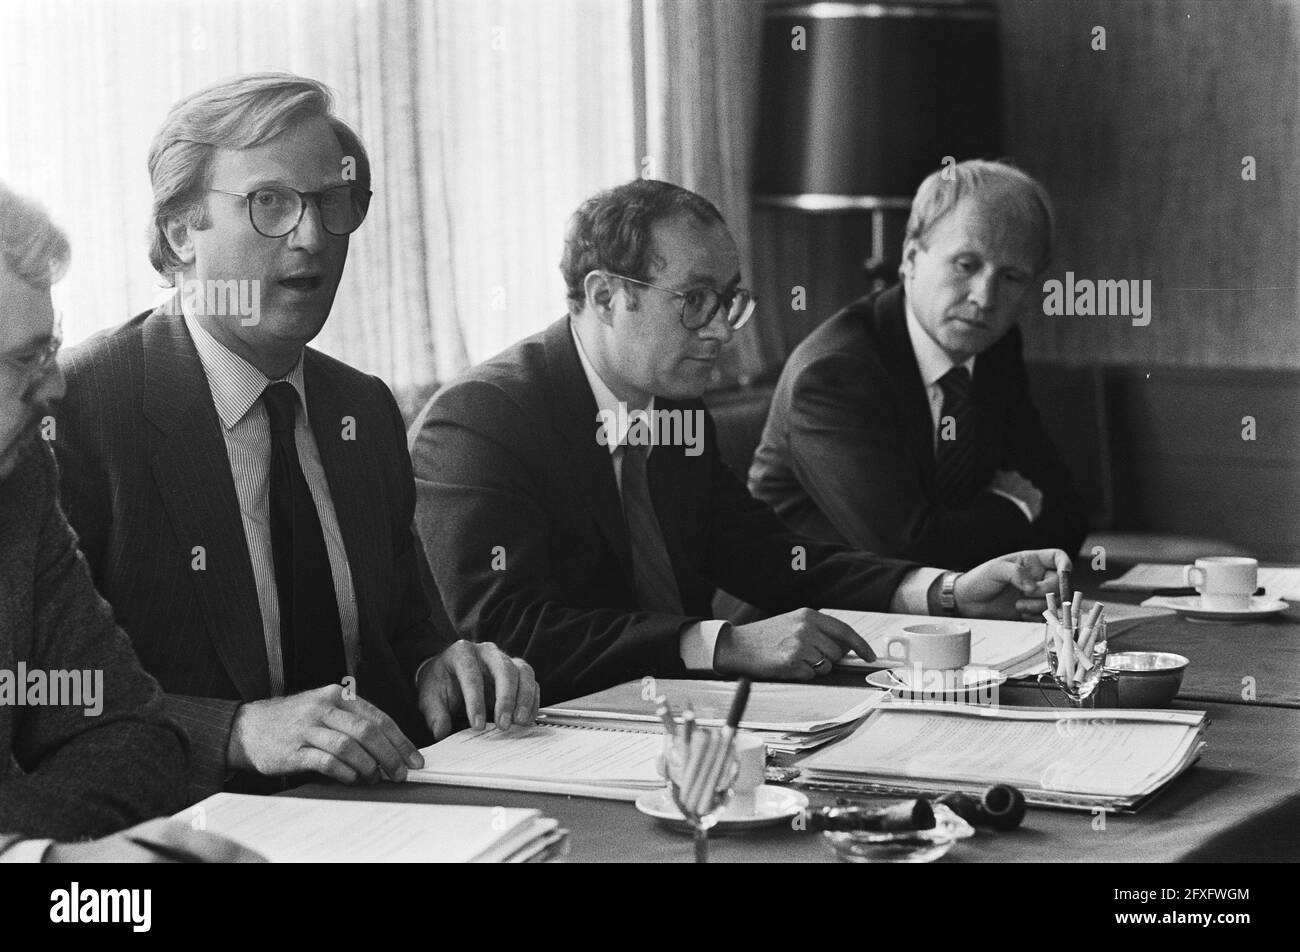 From left to right General Manager Kerdel, Director J. Krant and Director V. Hedel, June 28, 1983, directors, stock exchanges, press conferences, The Netherlands, 20th century press agency photo, news to remember, documentary, historic photography 1945-1990, visual stories, human history of the Twentieth Century, capturing moments in time Stock Photo